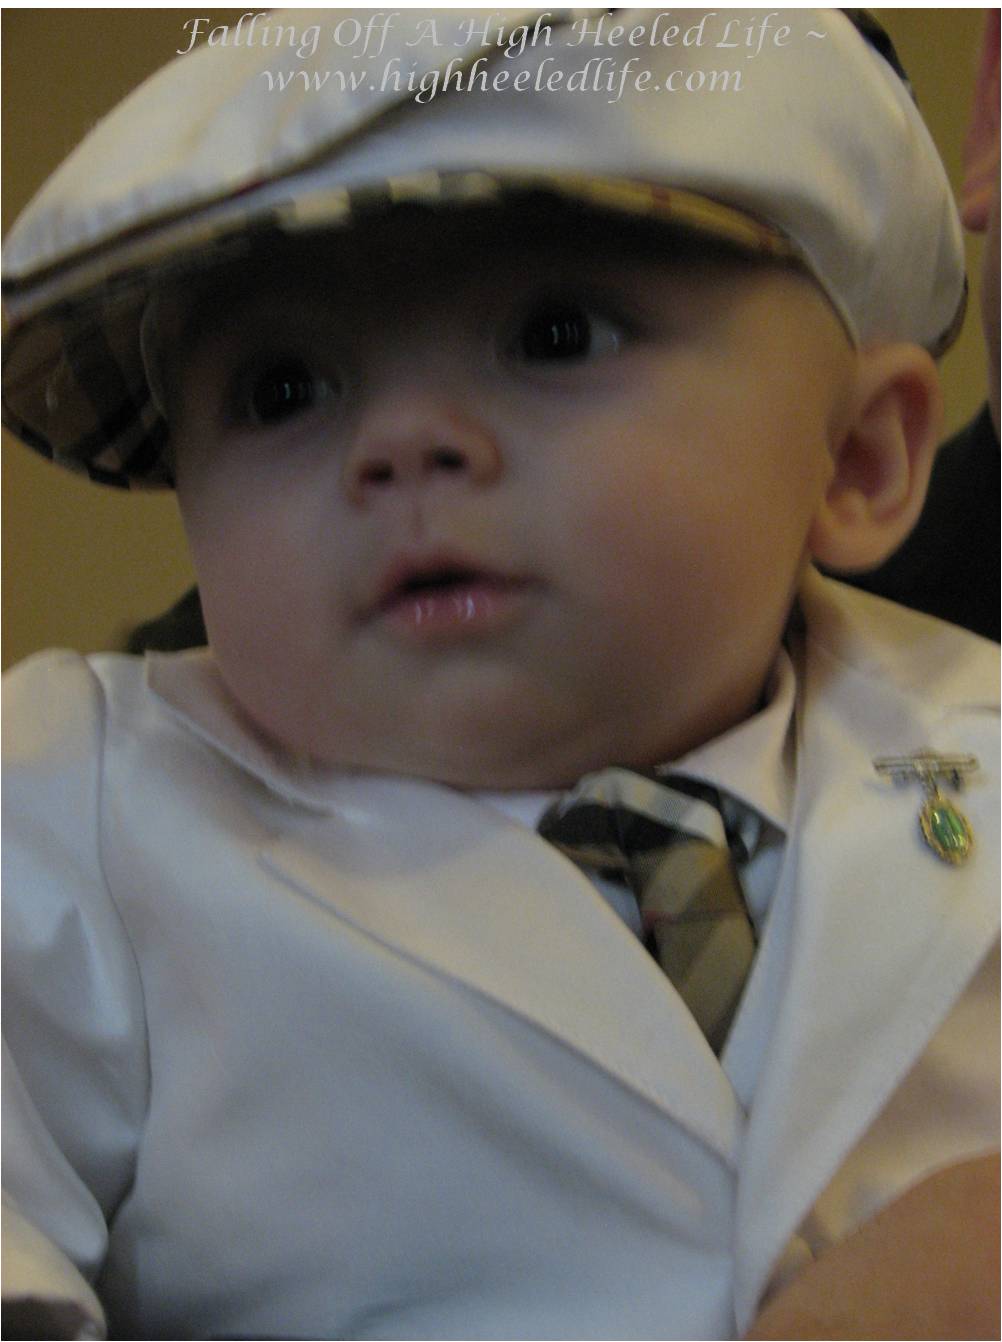 burberry christening outfit